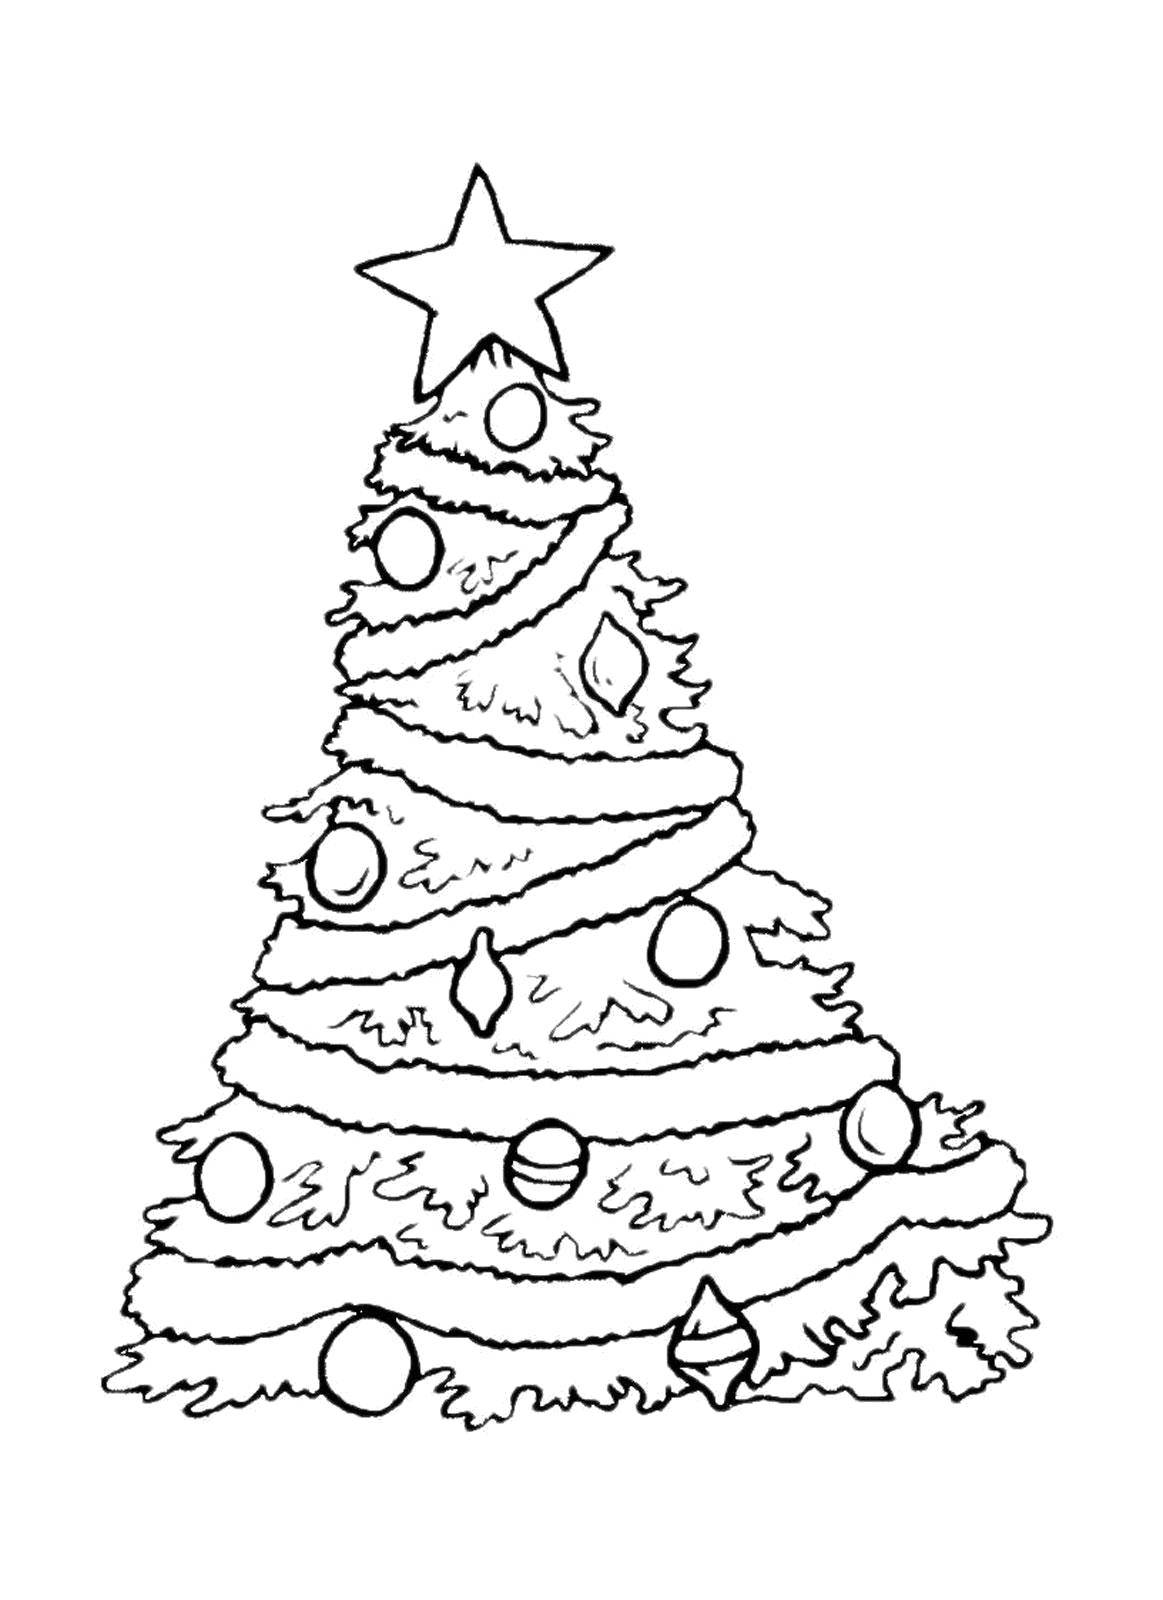 Coloring Furry tree with toys and star. Category coloring Christmas tree. Tags:  New Year, tree, gifts, toys.